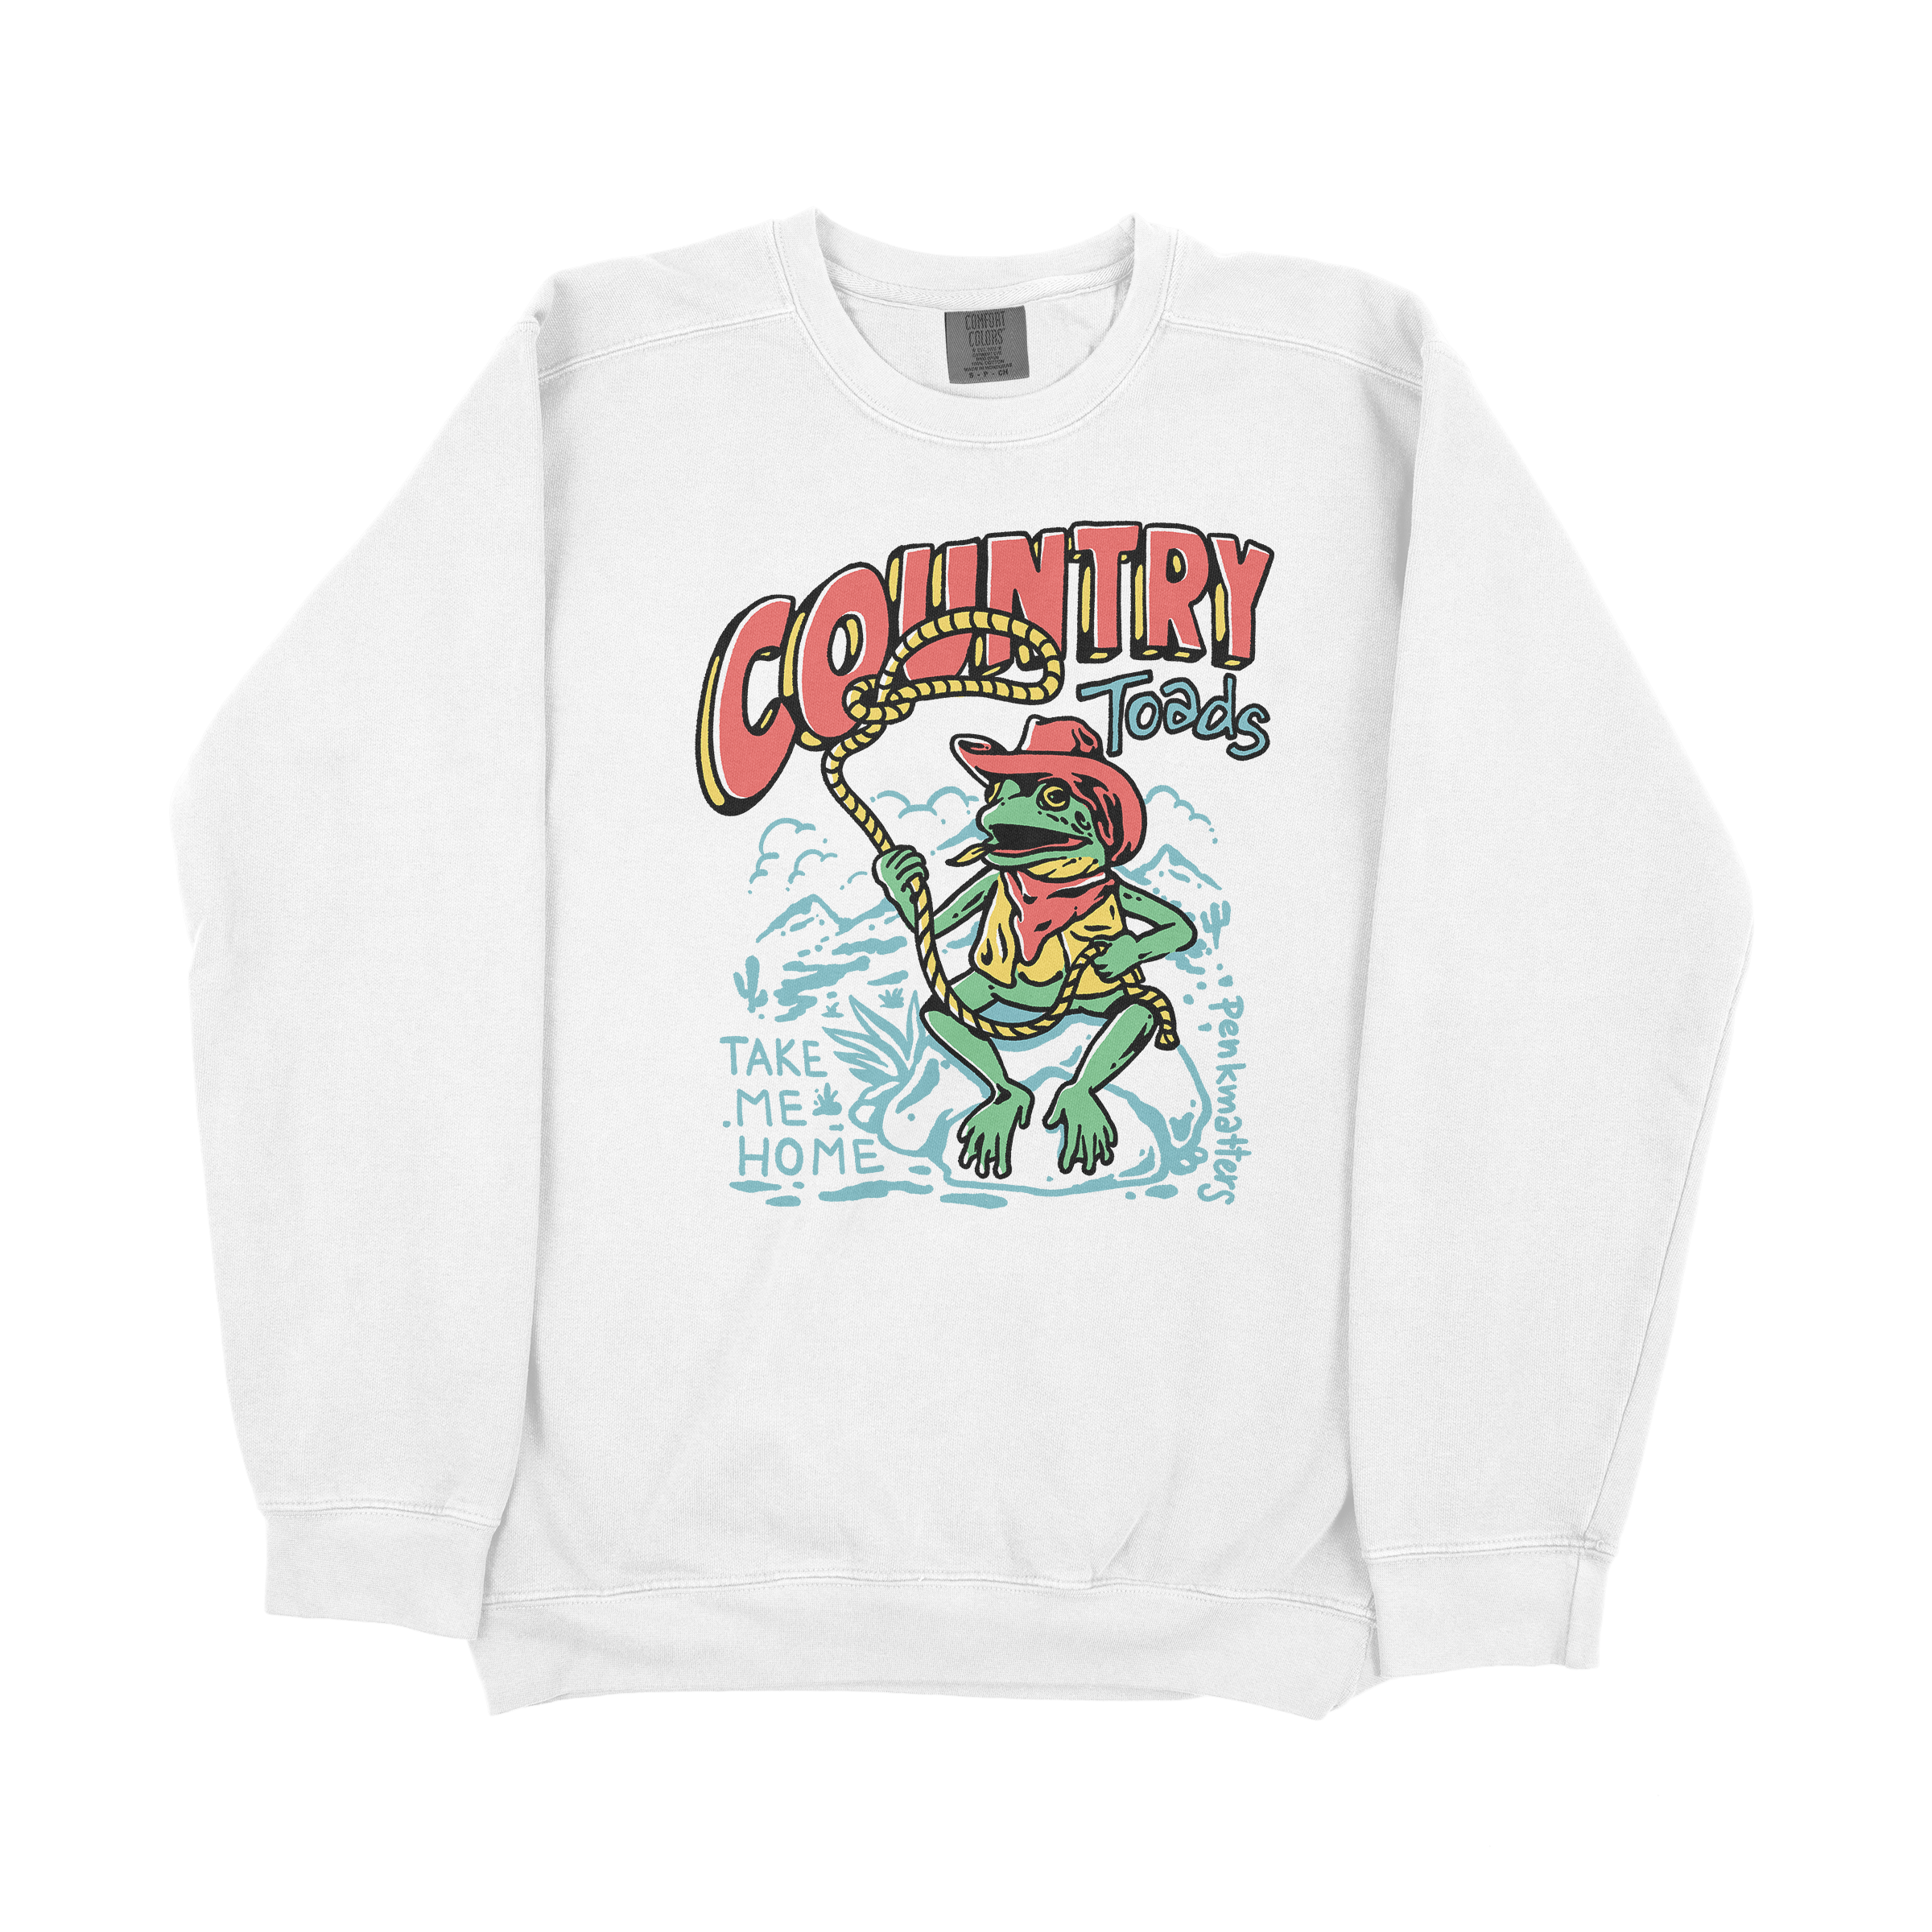 Country Toads sweatshirt: humor and country vibes combined.